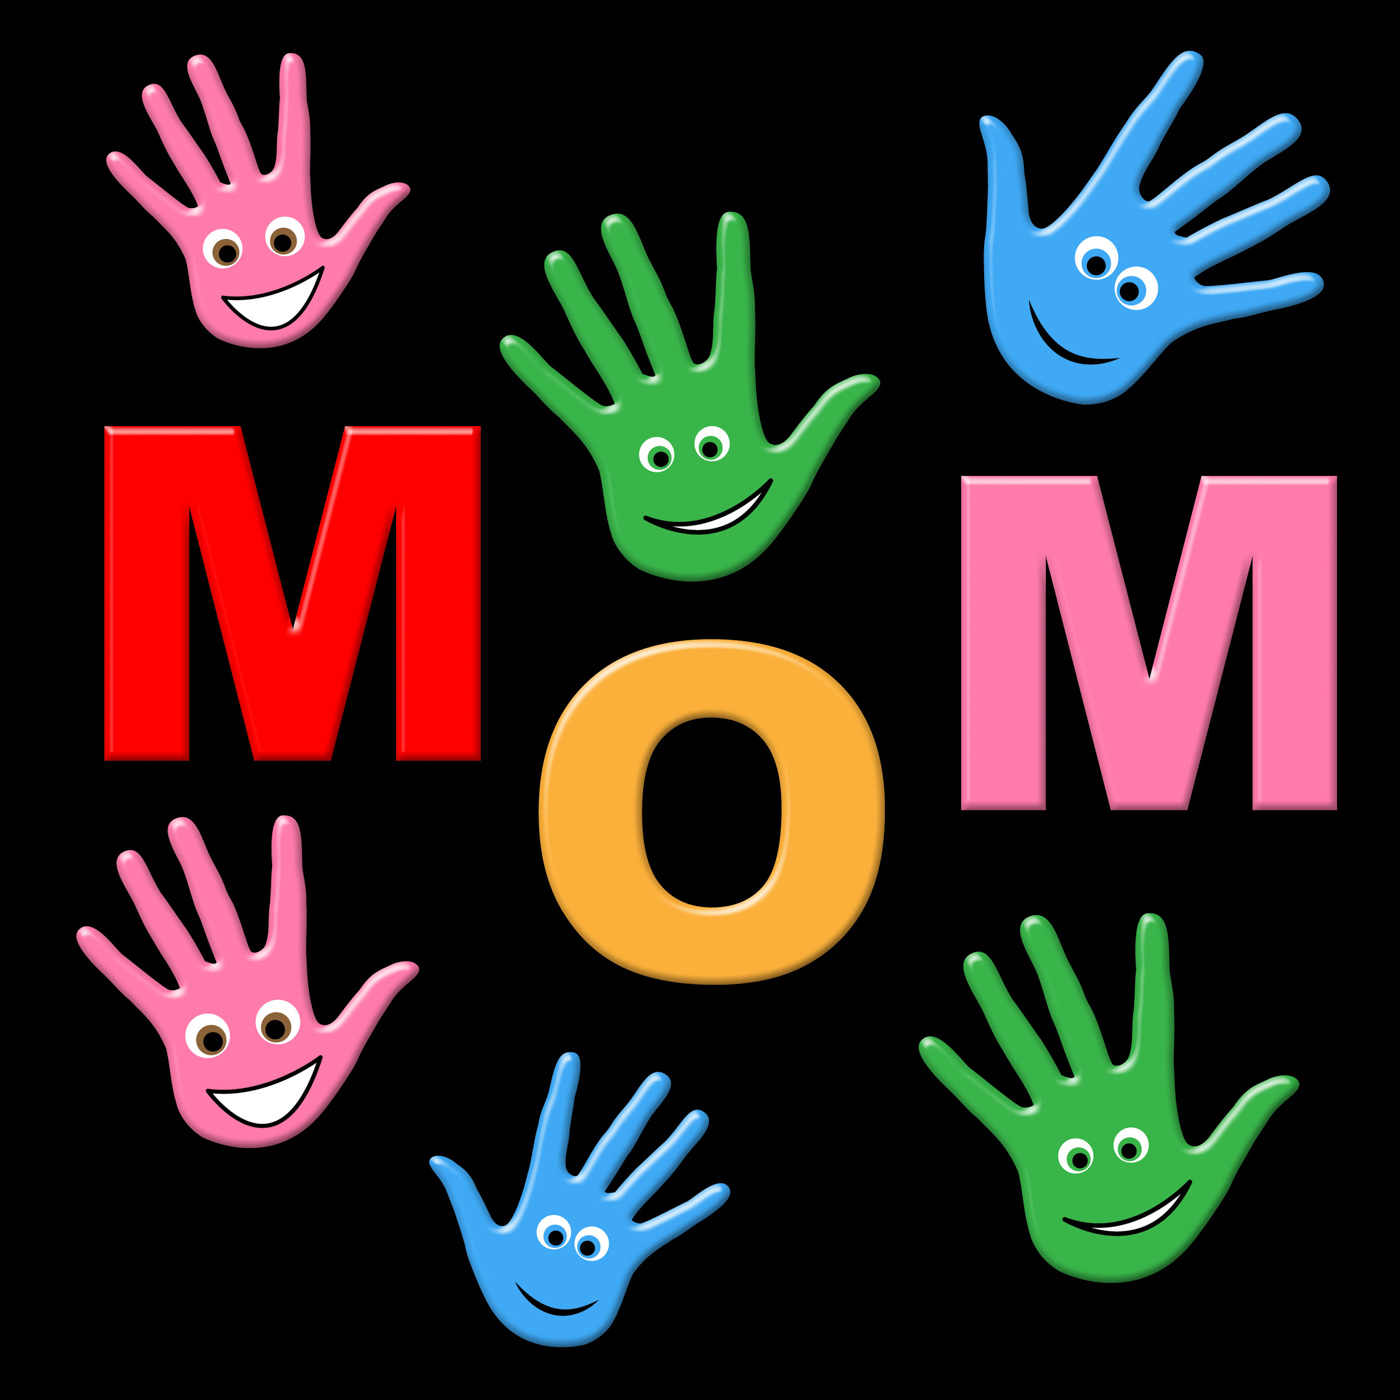 Mom Handprints Shows Painted Mommy And Creativity, Artwork, Mamma, Painted, Mummy, HQ Photo